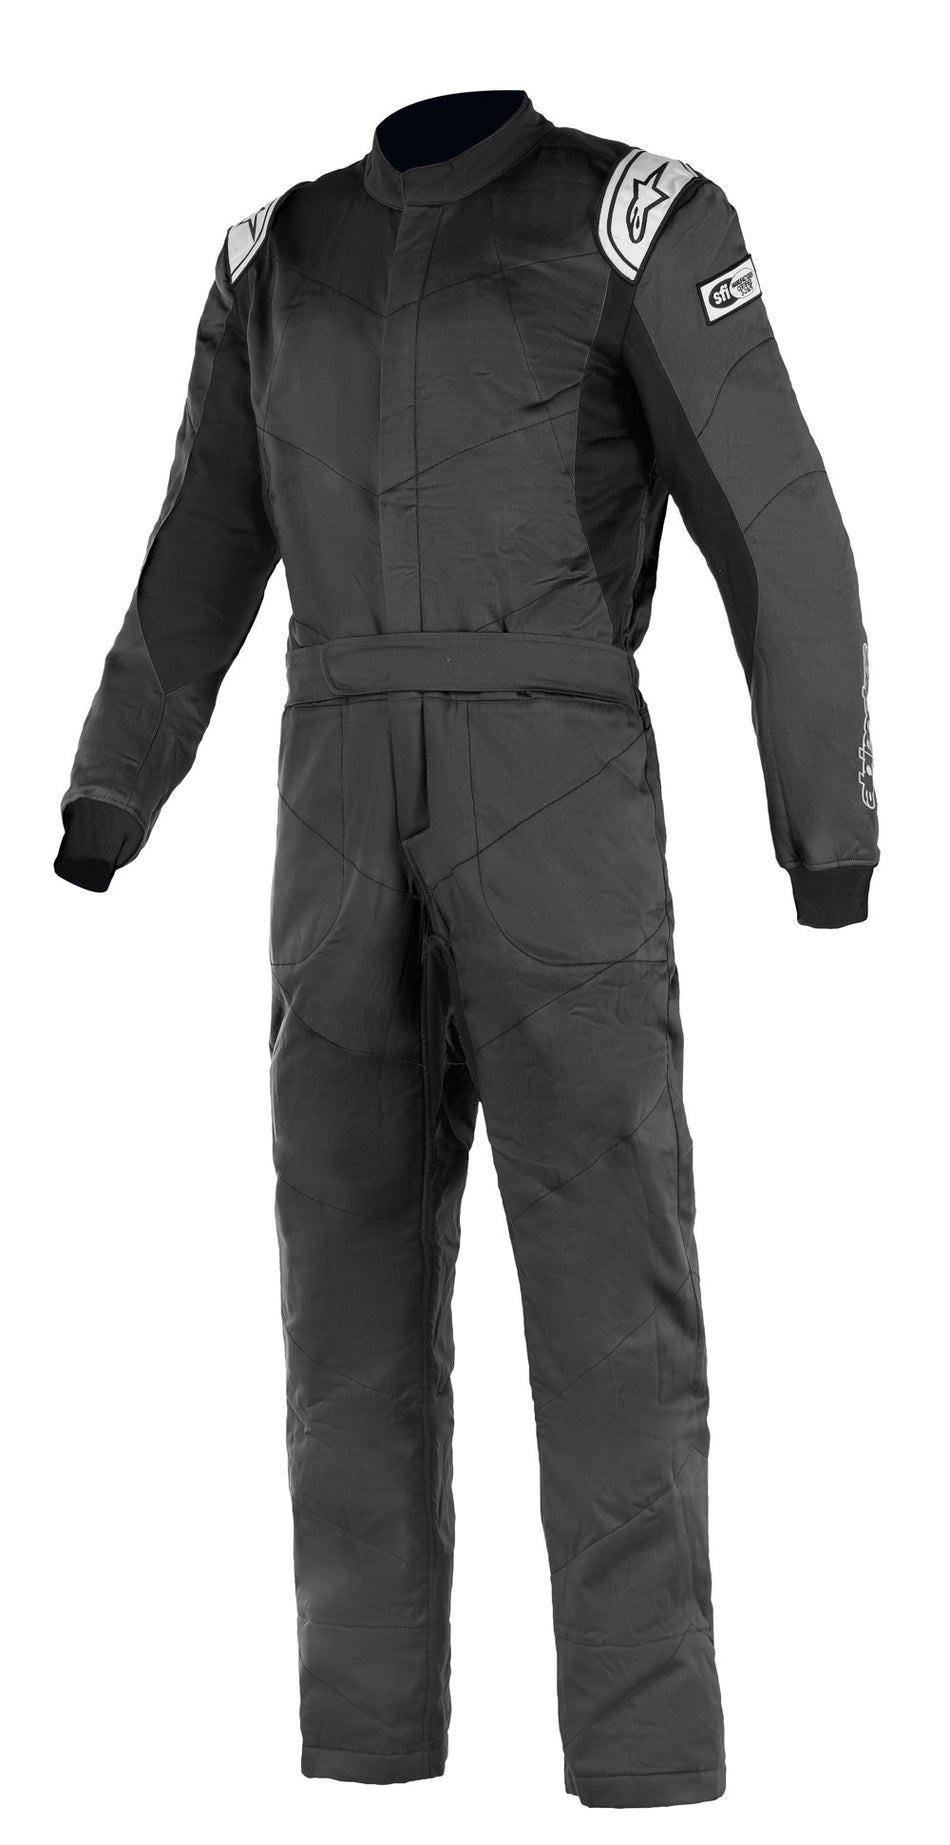 Driving Suit - Knoxville V2 - 1-Piece - SFI 3.2A/5 - Boot-Cut - Triple Layer - Fire Retardant Fabric - Black - Size 56 - Large - Each